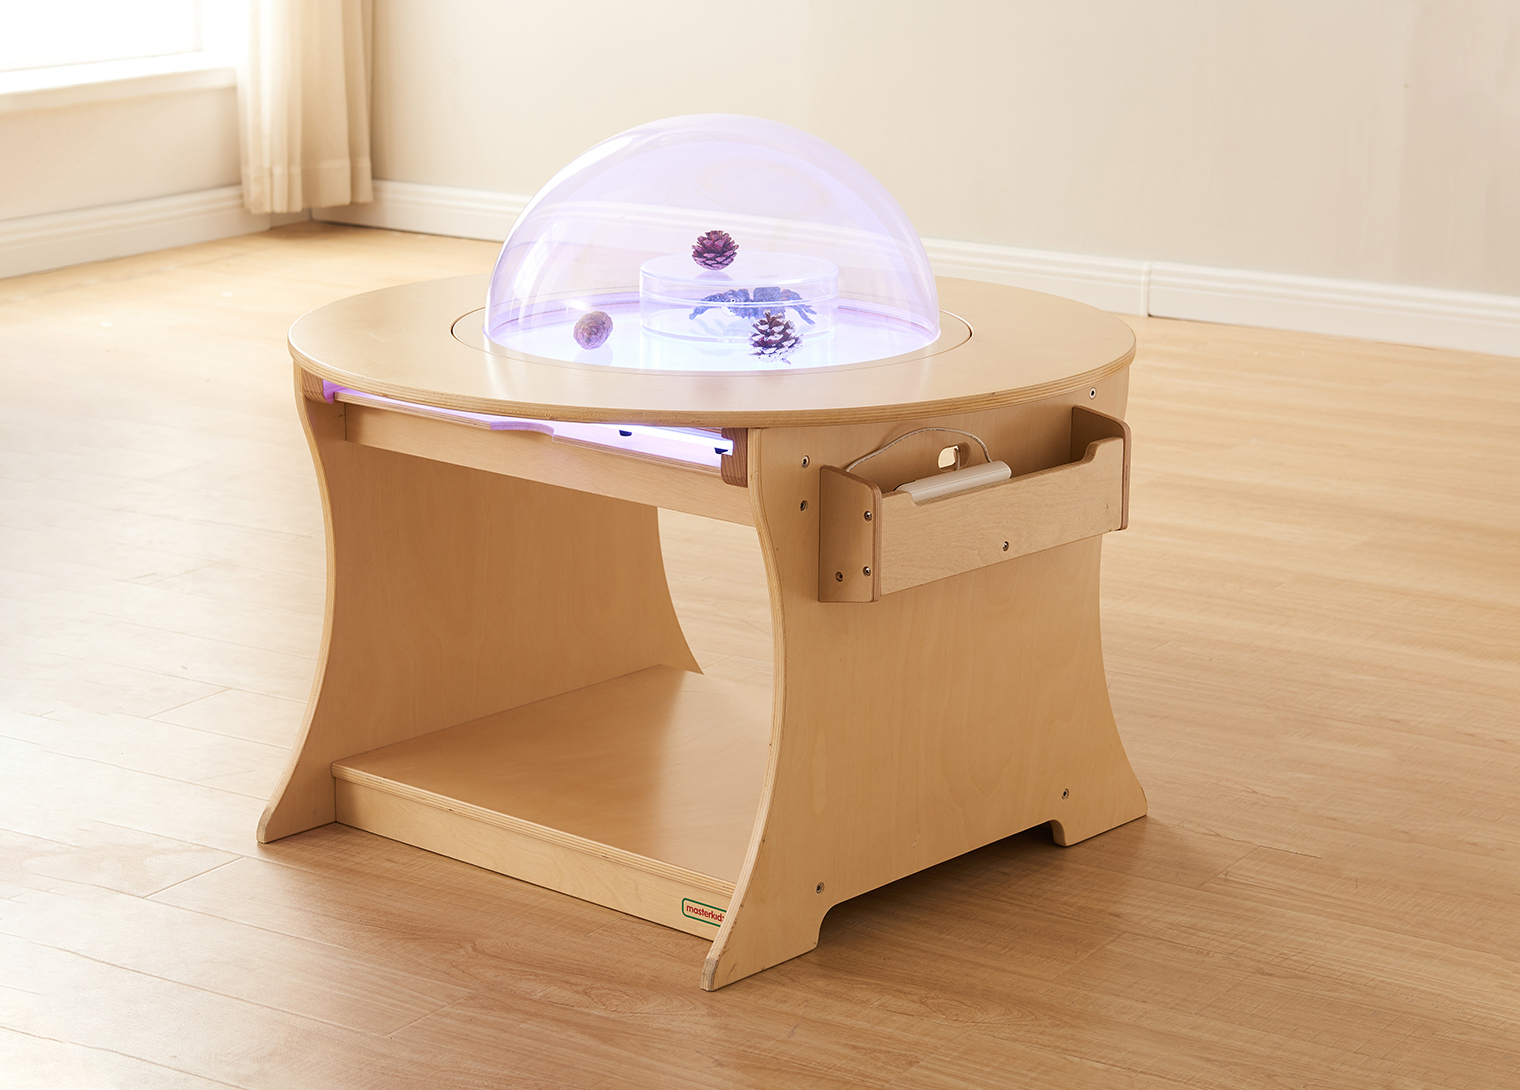 Hemispherical Observation Table (Light Panel Not Included)